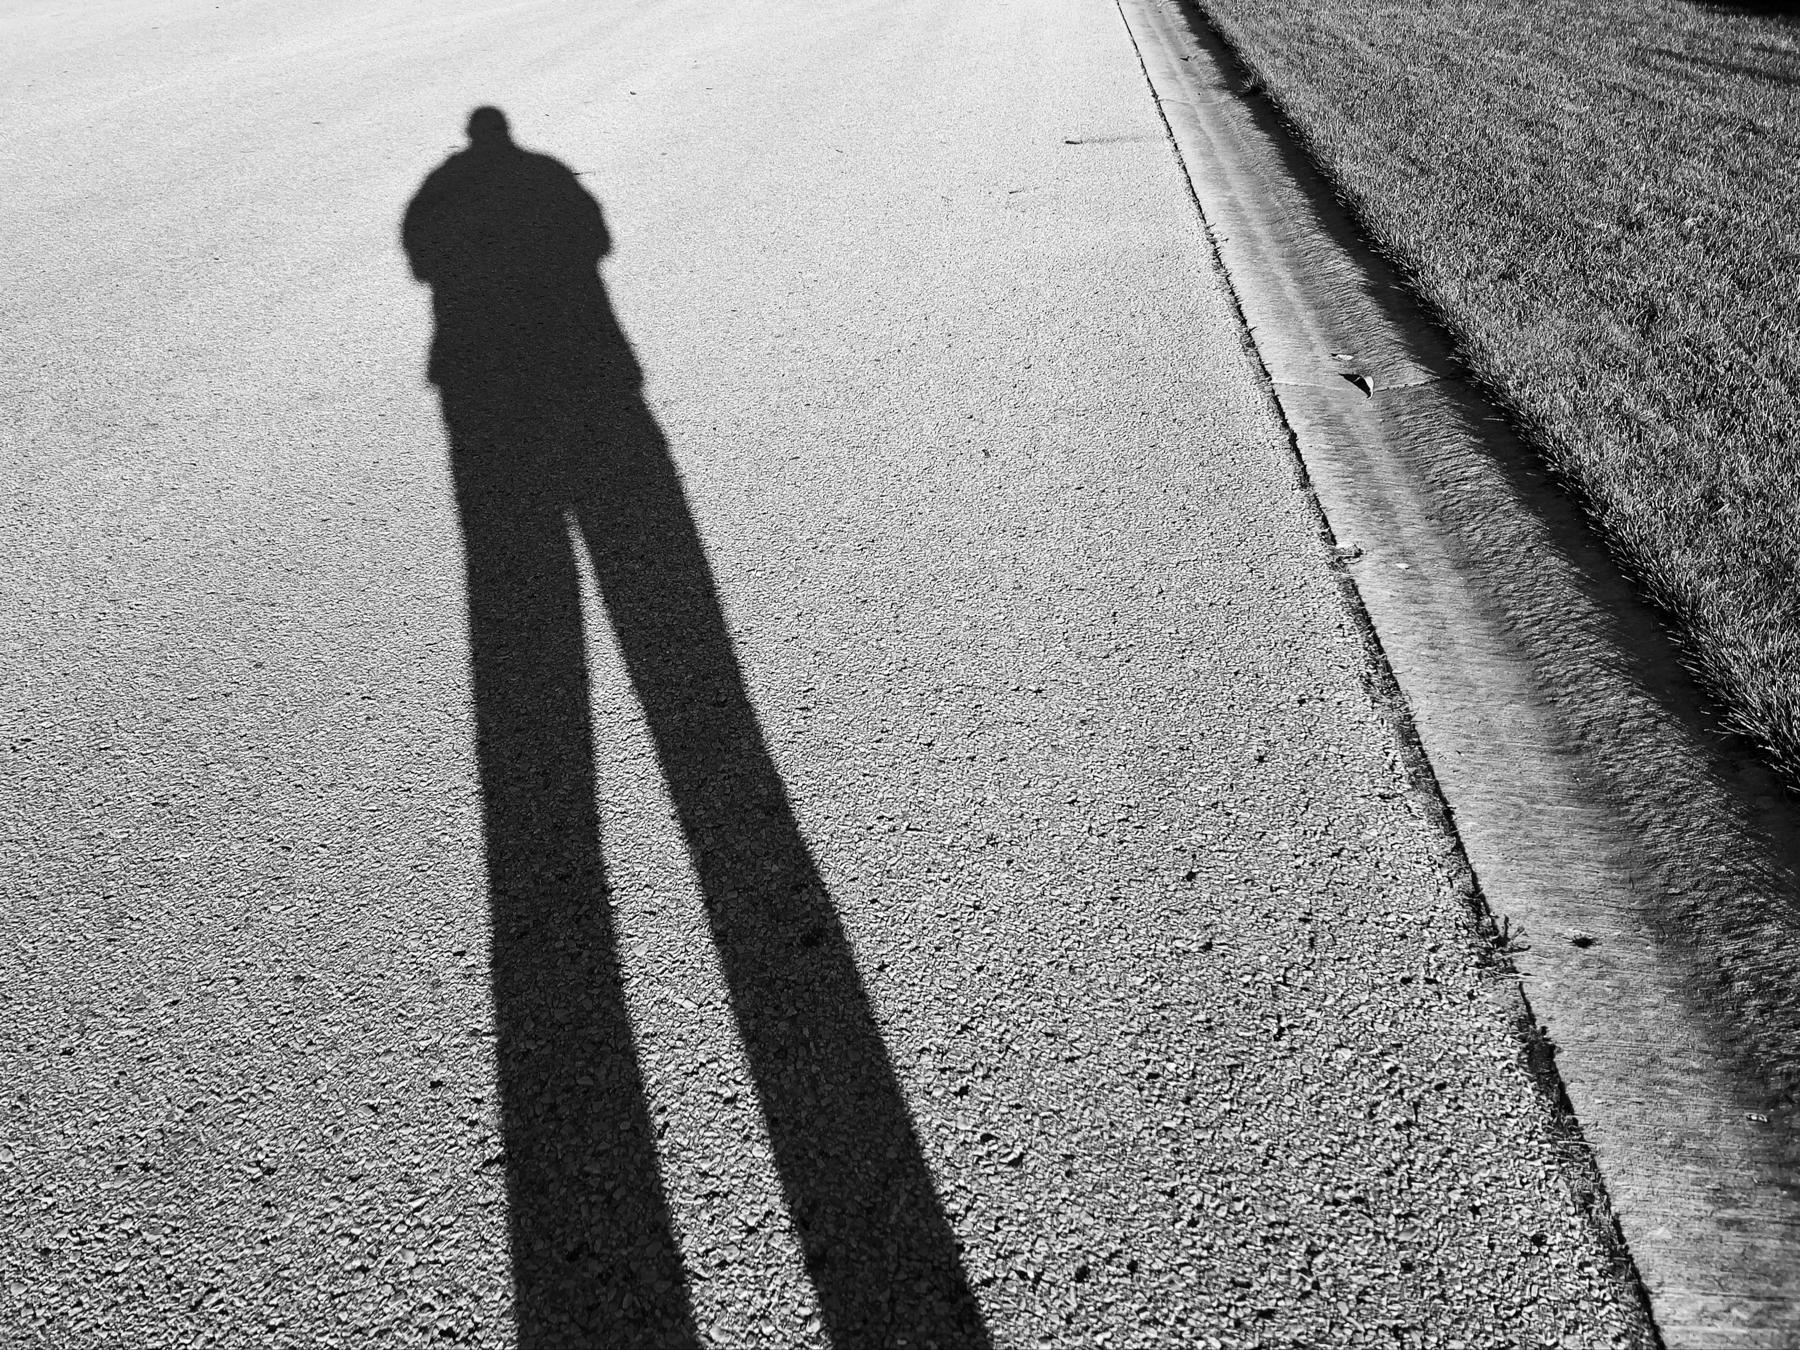 Black and white shot taken of my elongated shadow being cast on the road, with the sun moving lower behind me. The section of road is actually free of leaves, and the top right of the frame has an also leaf-free section of grass running along the road.